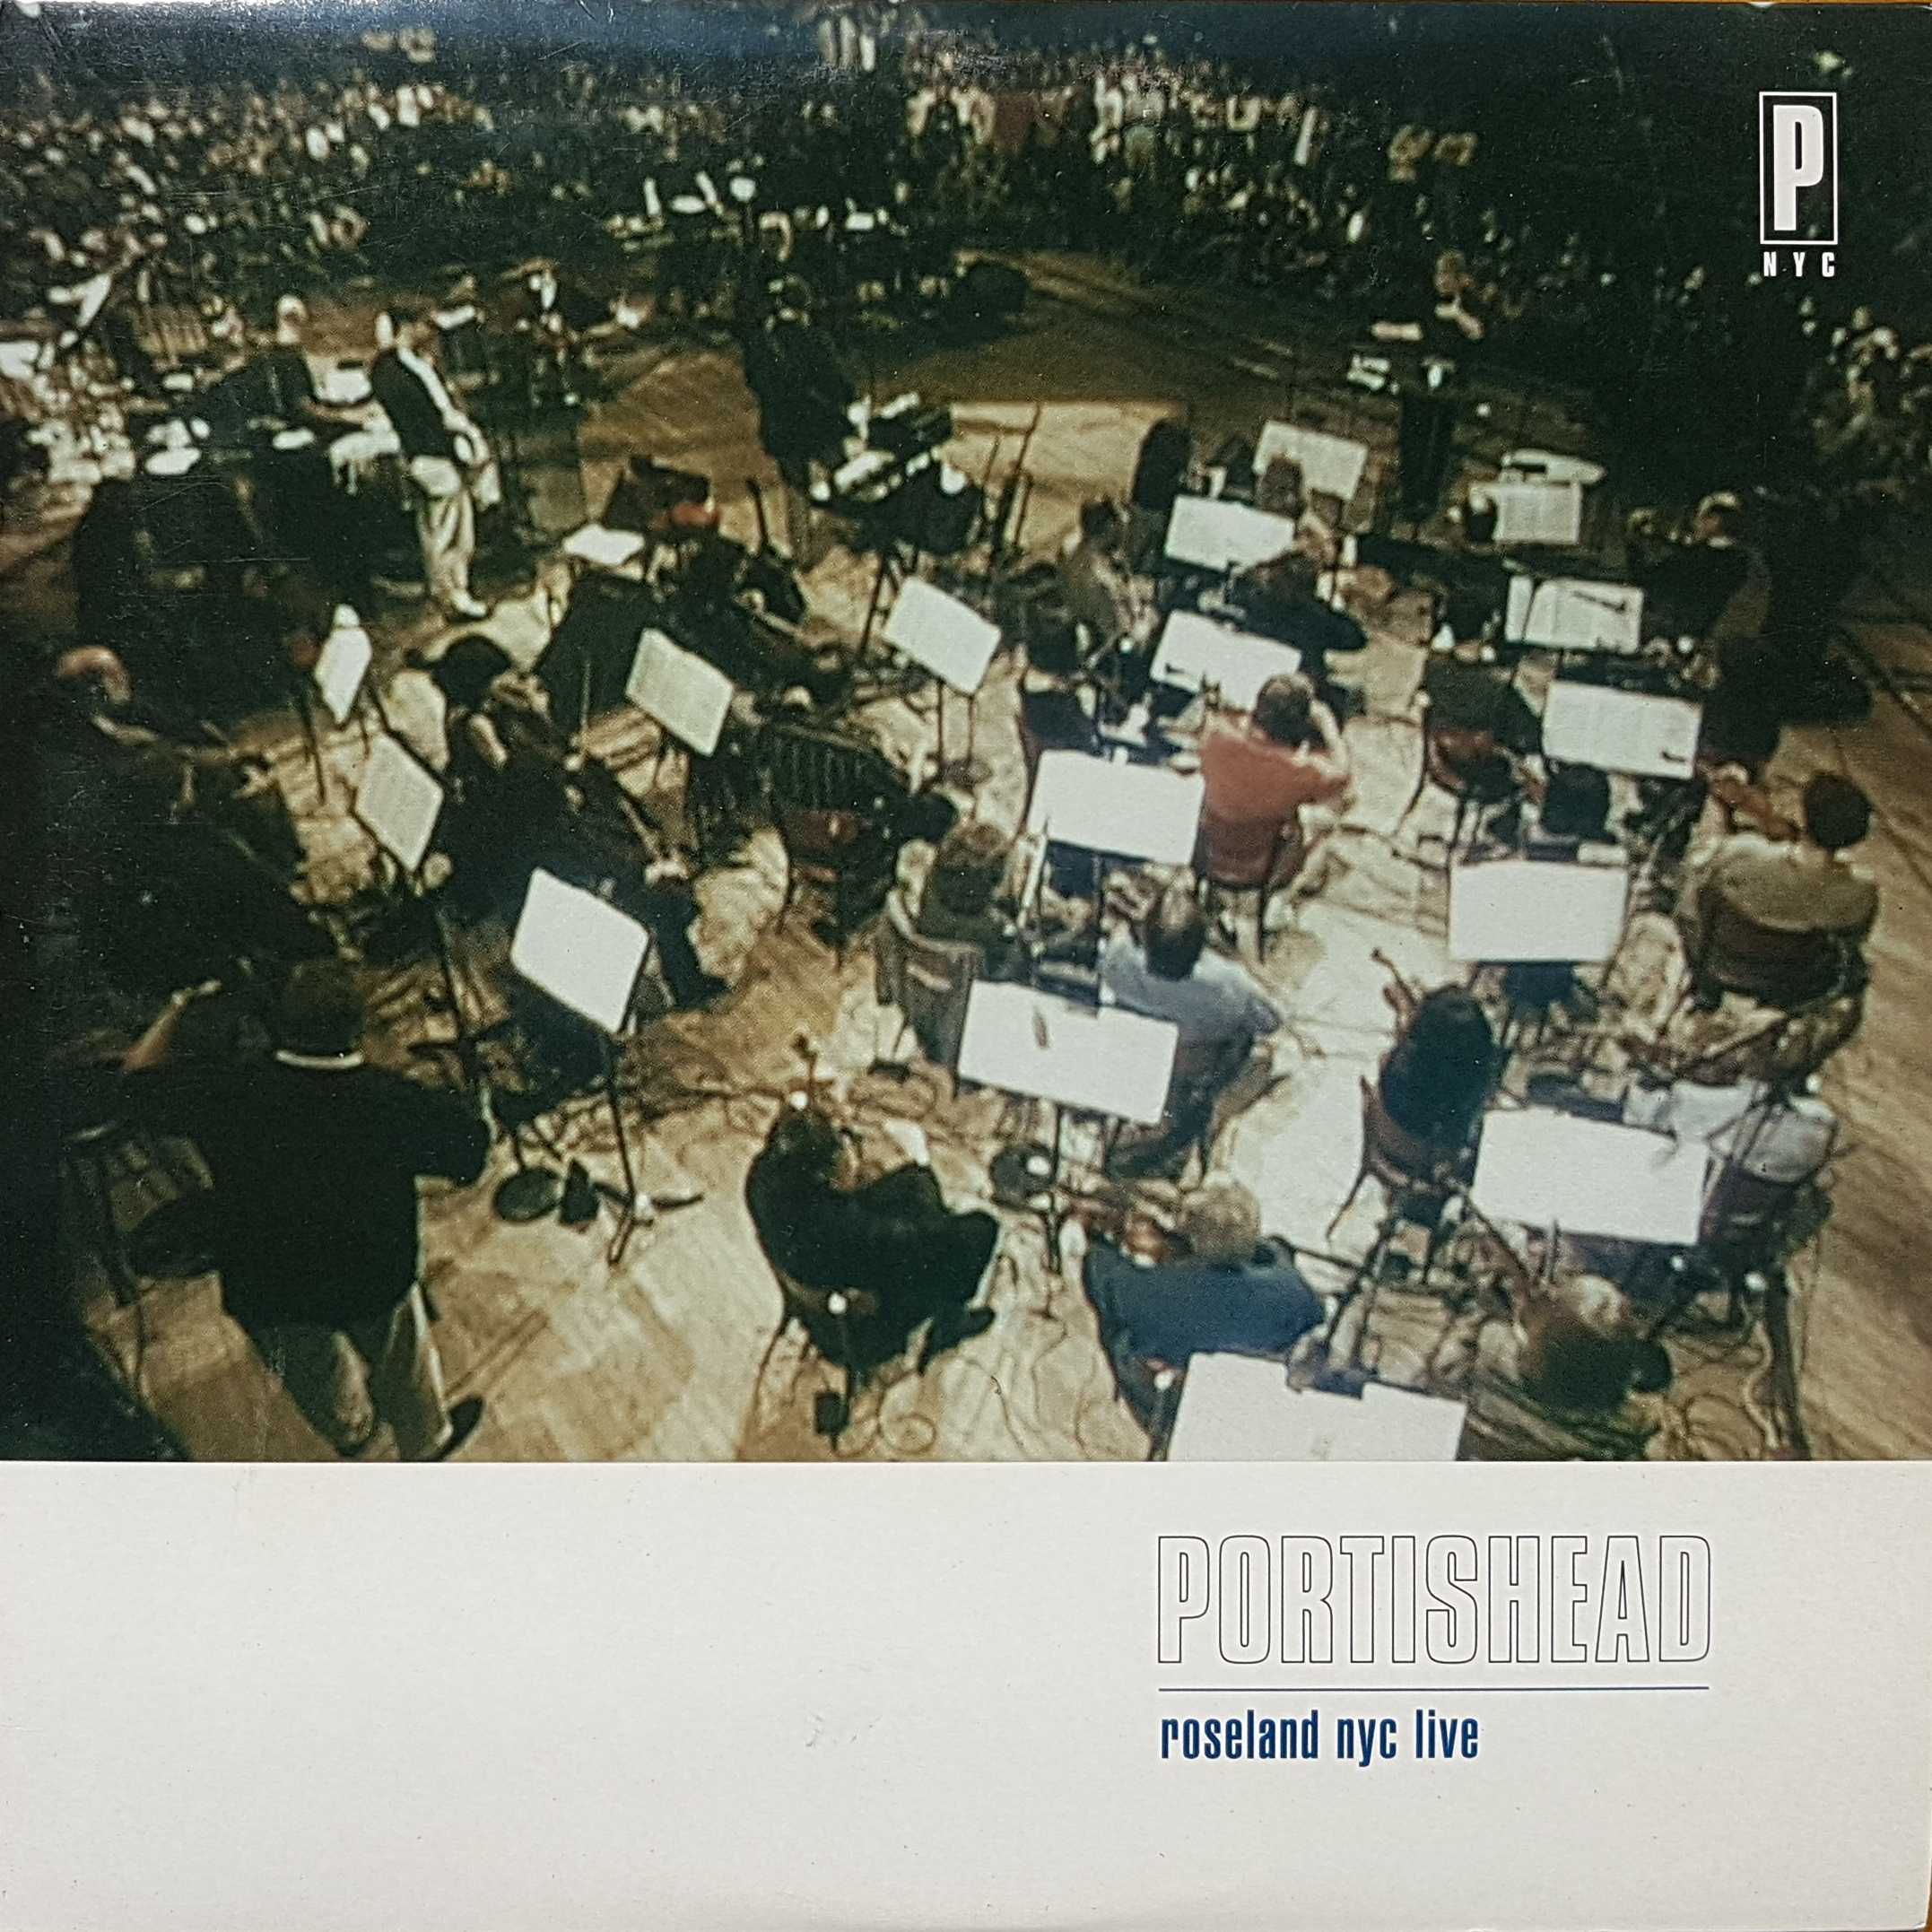 Picture of 559424 - 1 Roseland NYC - Live album by artist Portishead  